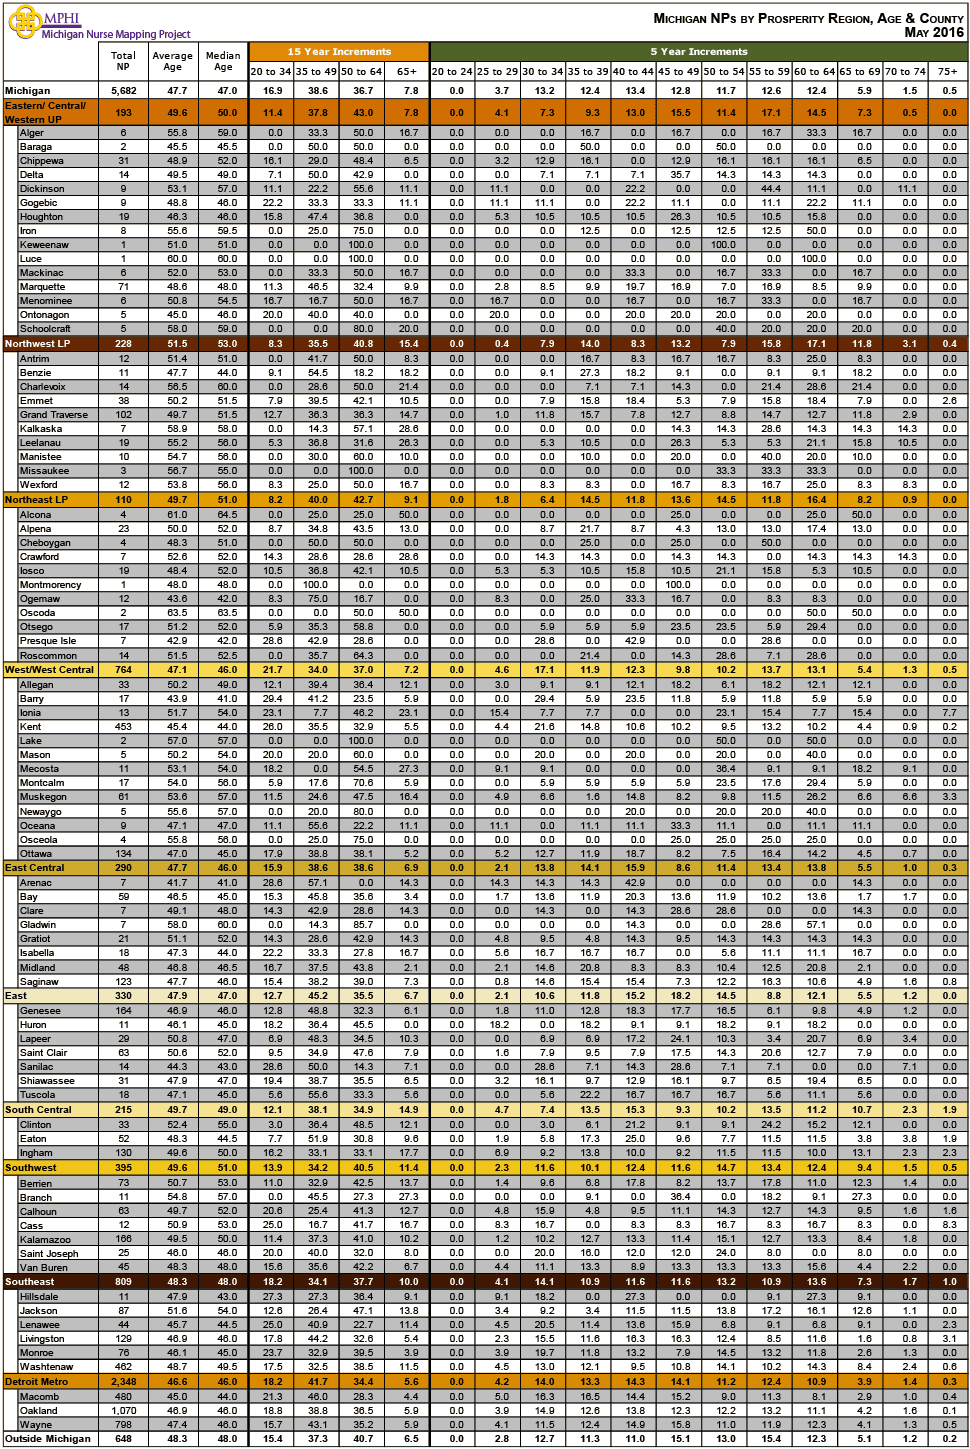 table depicting Michigan's Licensed Nurse Practitioners by age groups, county and prosperity regions in 2016